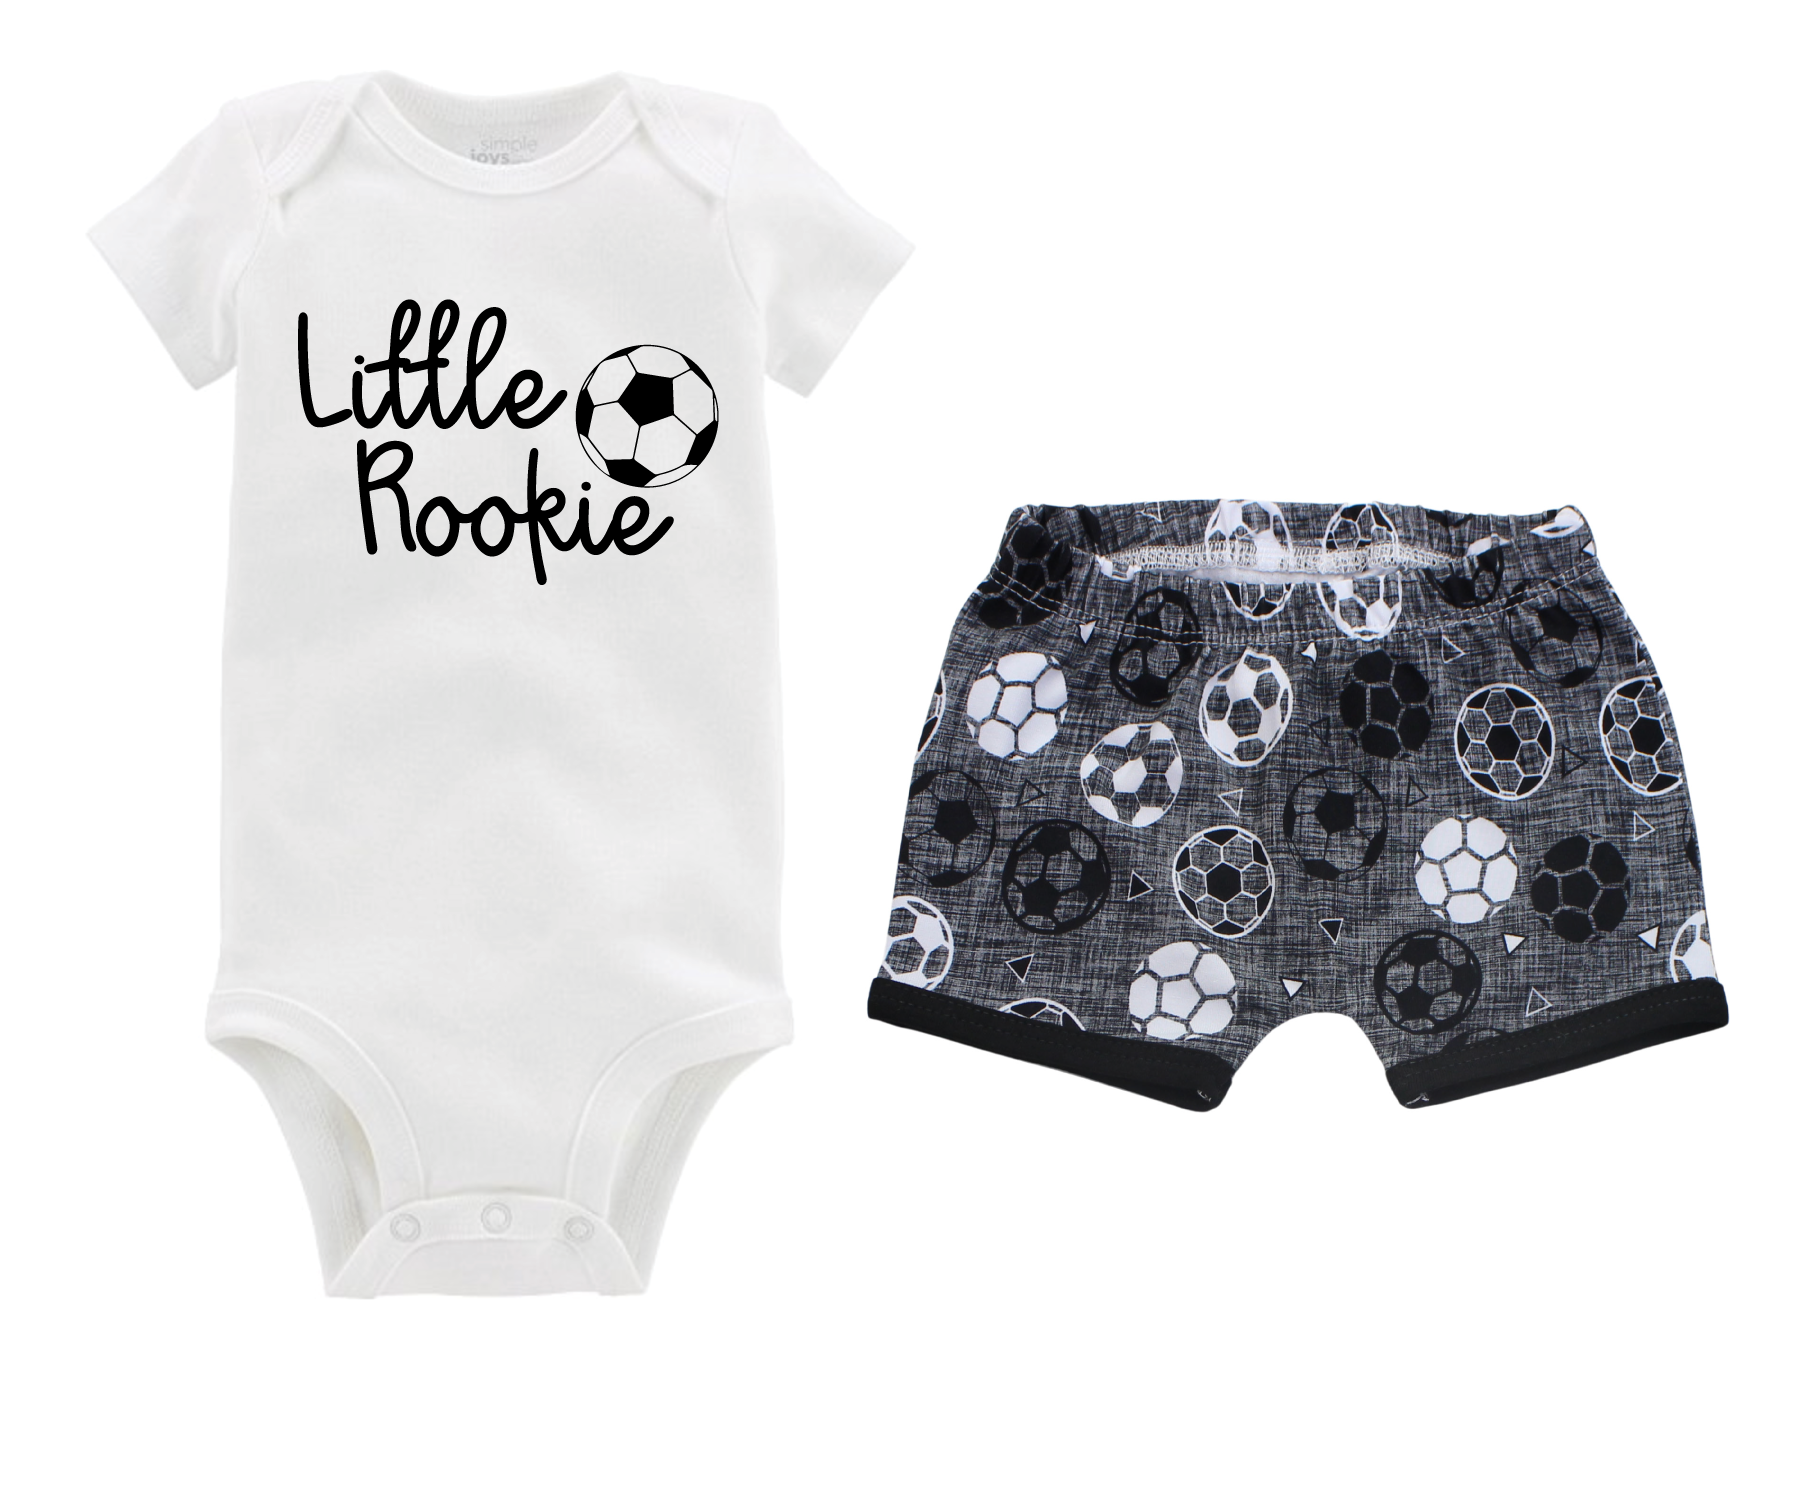 Unisex Gray Soccer Short Outfit